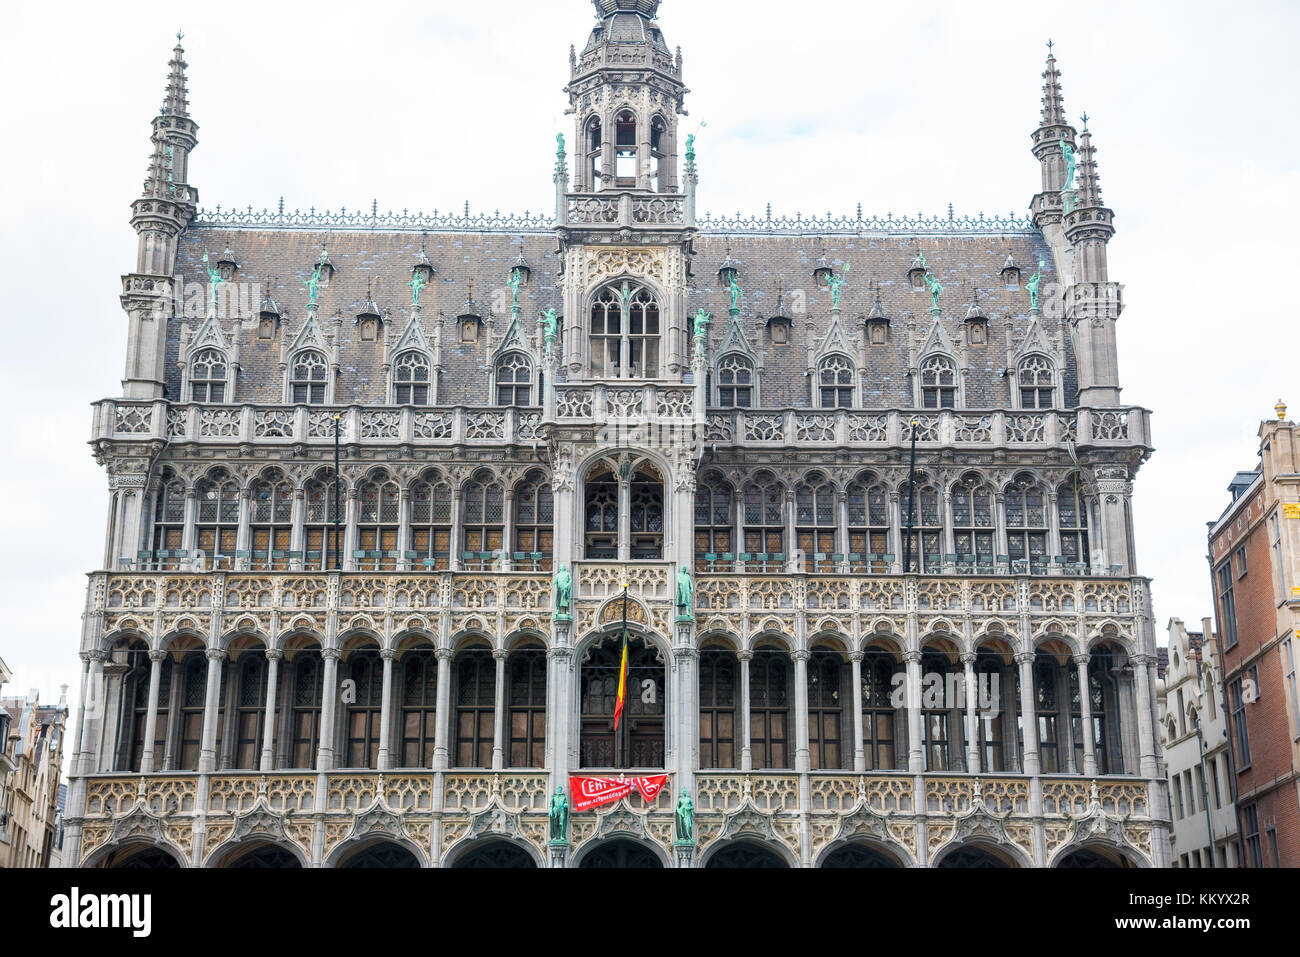 Brussels, Belgium - April 22, 2017: The Museum of the City of Brussels is a museum on the Grand Place in Brussels, Belgium. Stock Photo